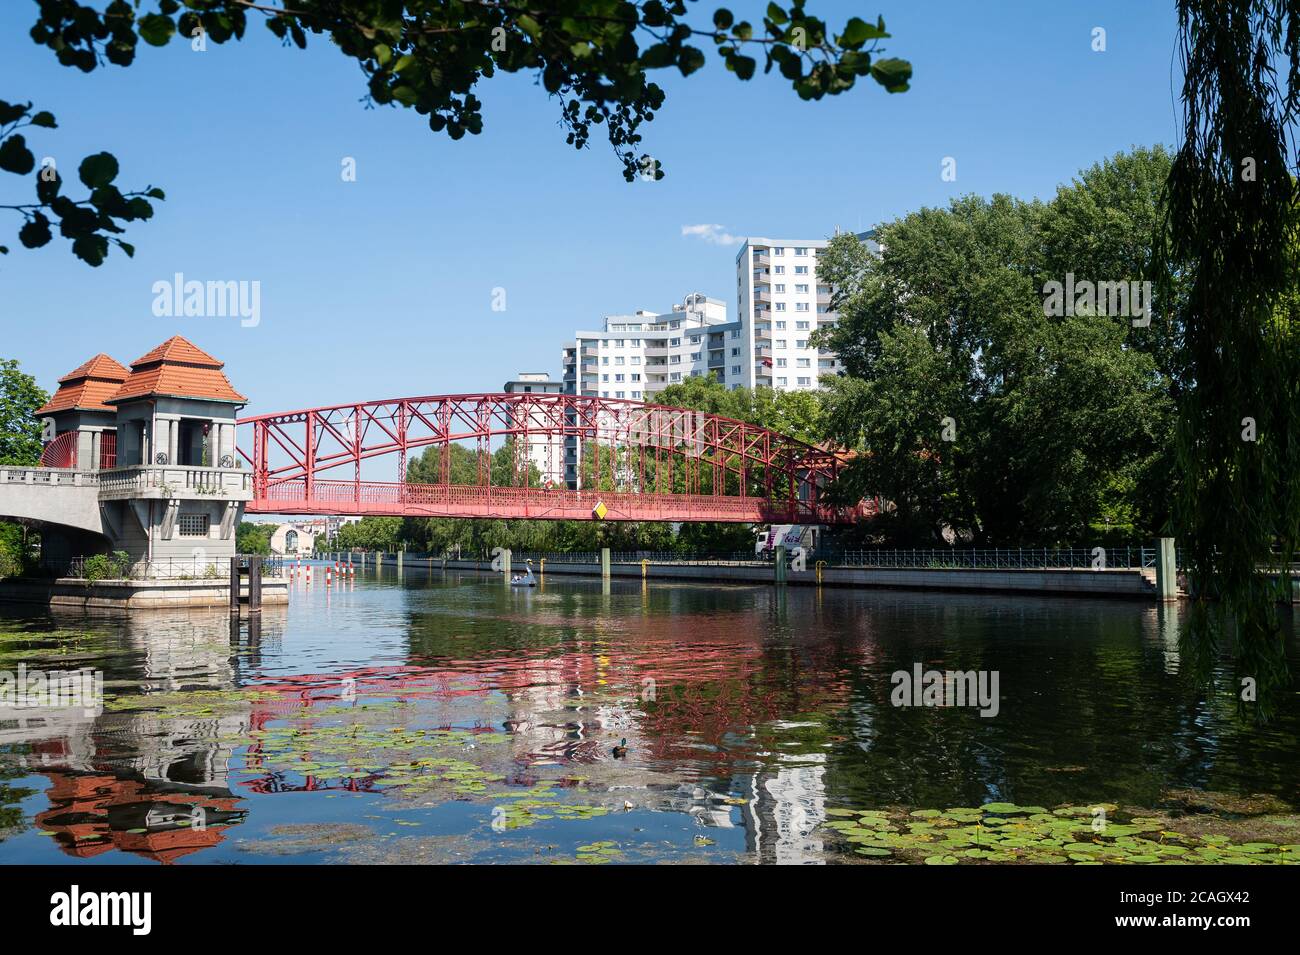 13.06.2019, Berlin, Berlin, Germany - The Tegel harbour bridge (Sechserbruecke) connects both banks of the Tegeler Fliess and Tegel harbour in the dis Stock Photo